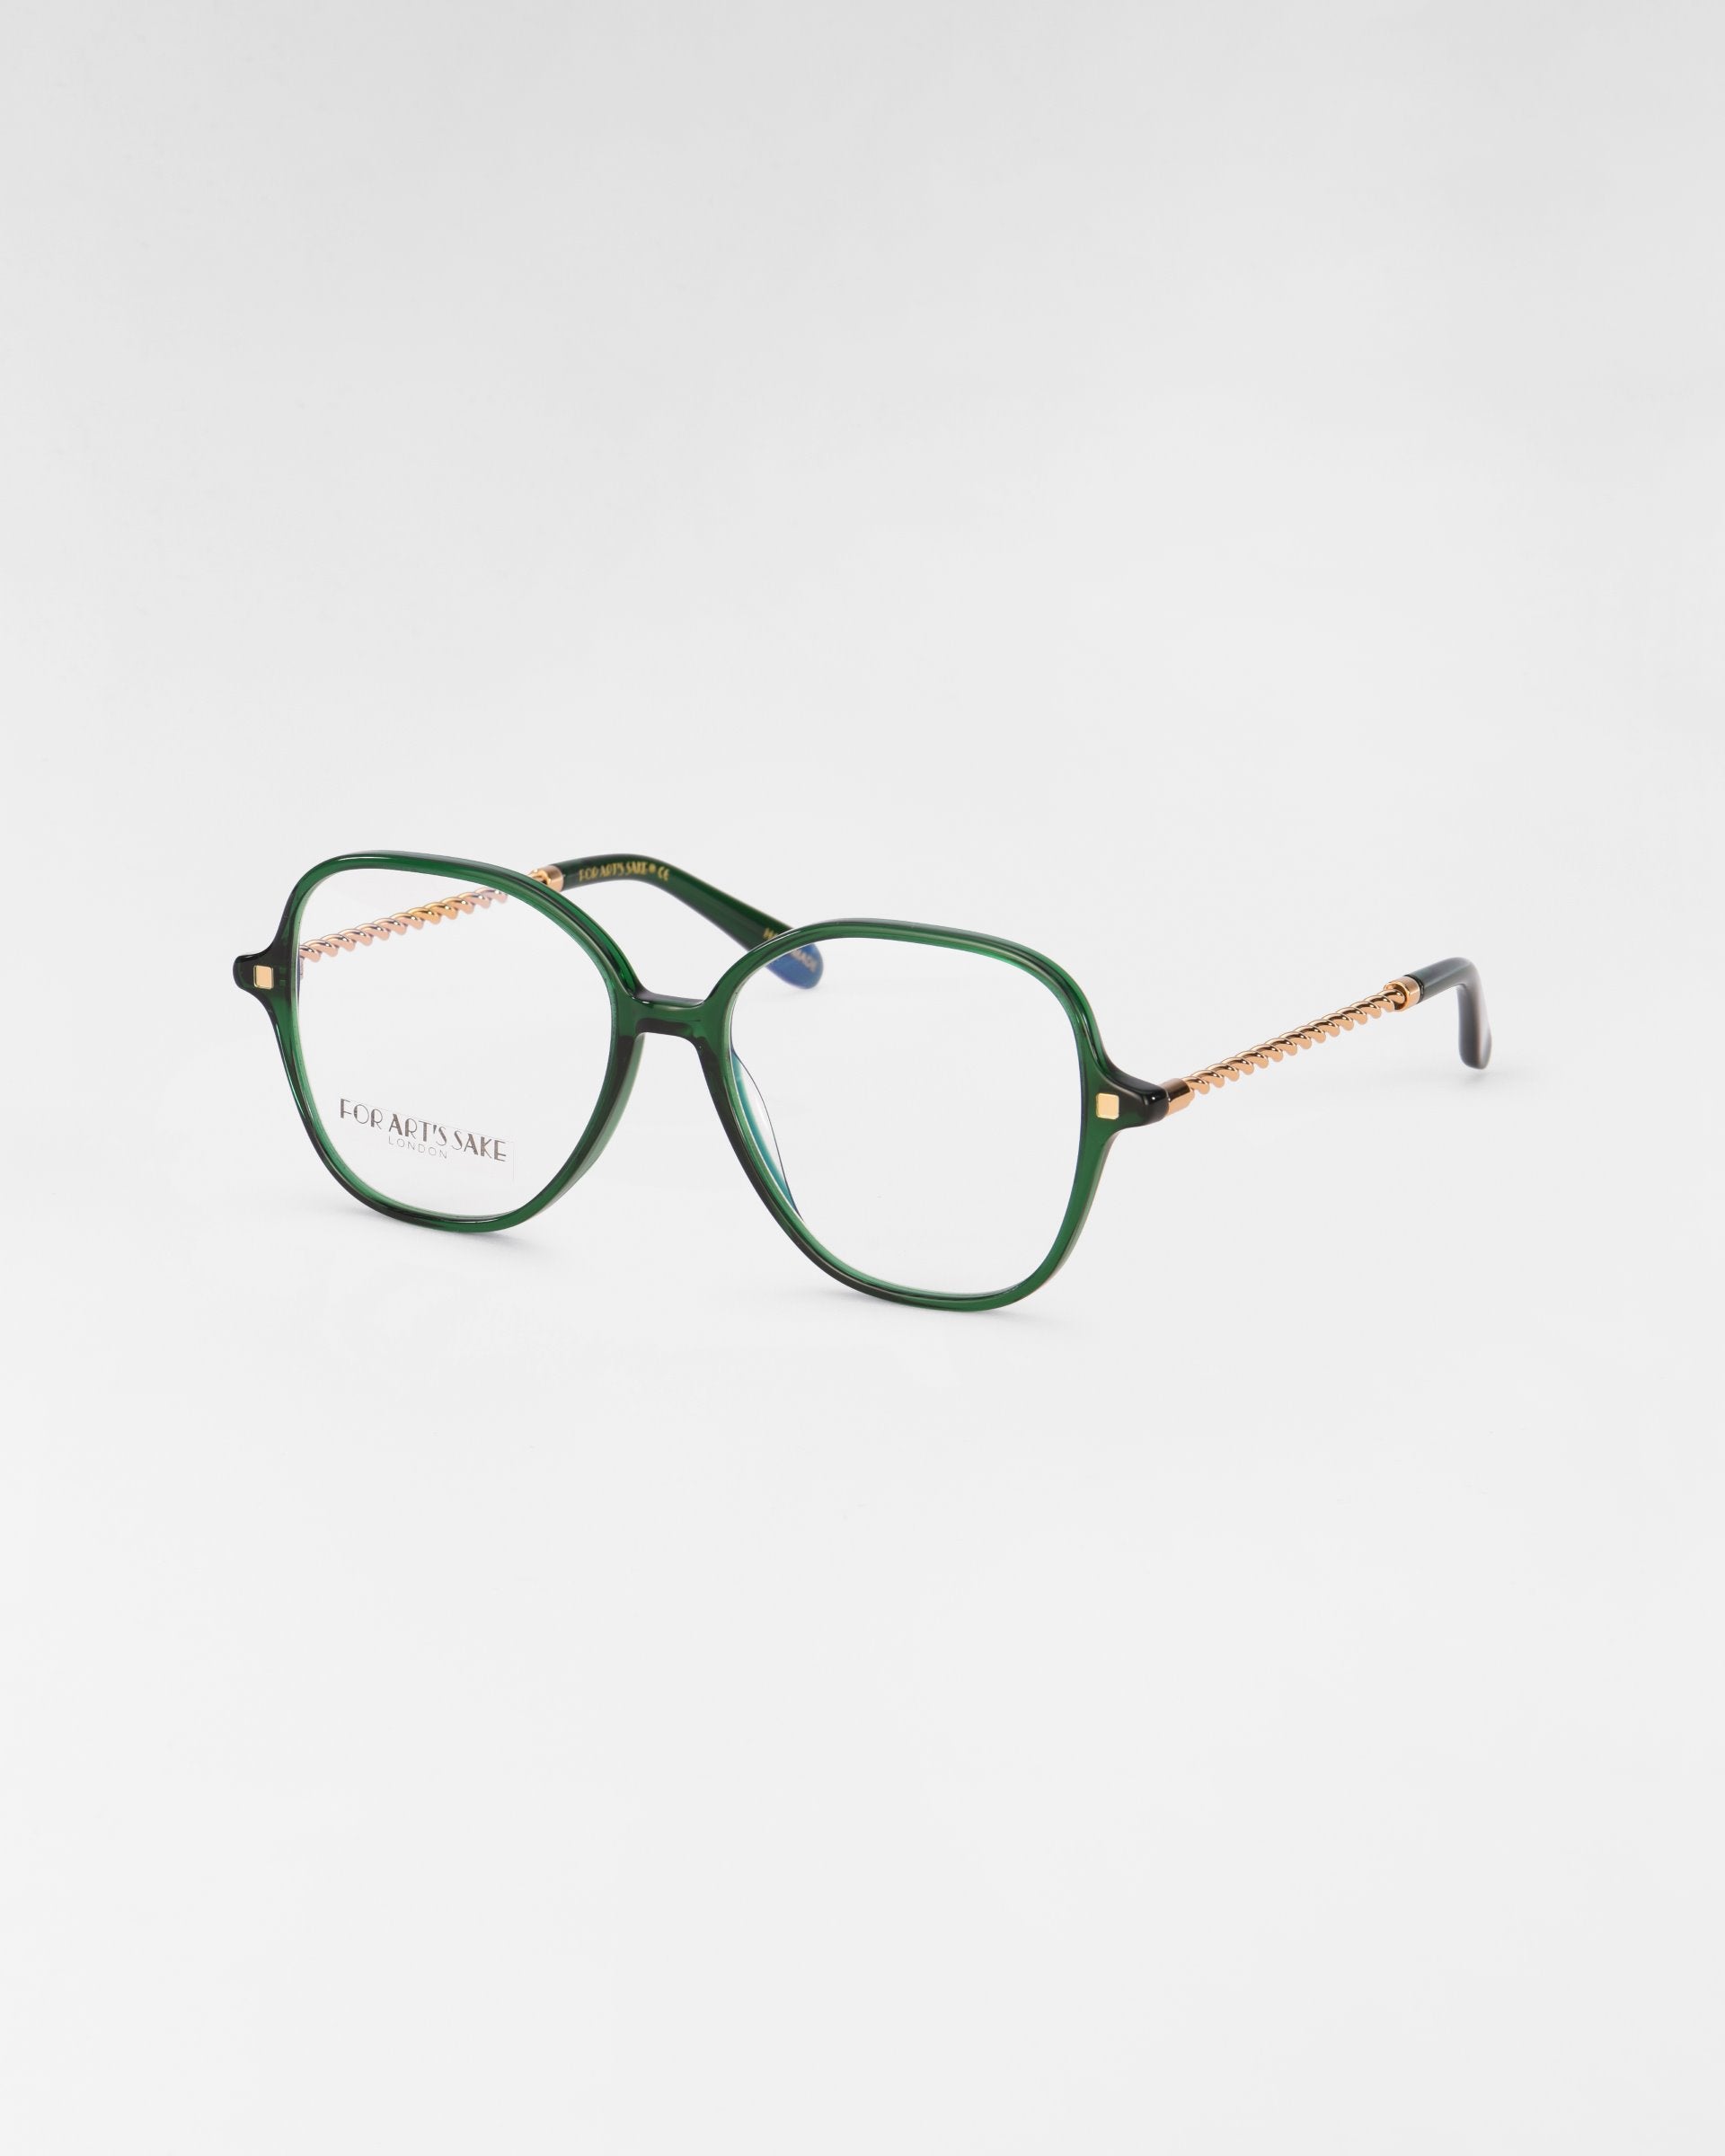 A pair of For Art's Sake® Dumpling eyeglasses with green rectangular frames and transparent lenses featuring a blue light filter. The temples are adorned with a textured gold pattern and have black tips. The product is displayed on a plain white background.